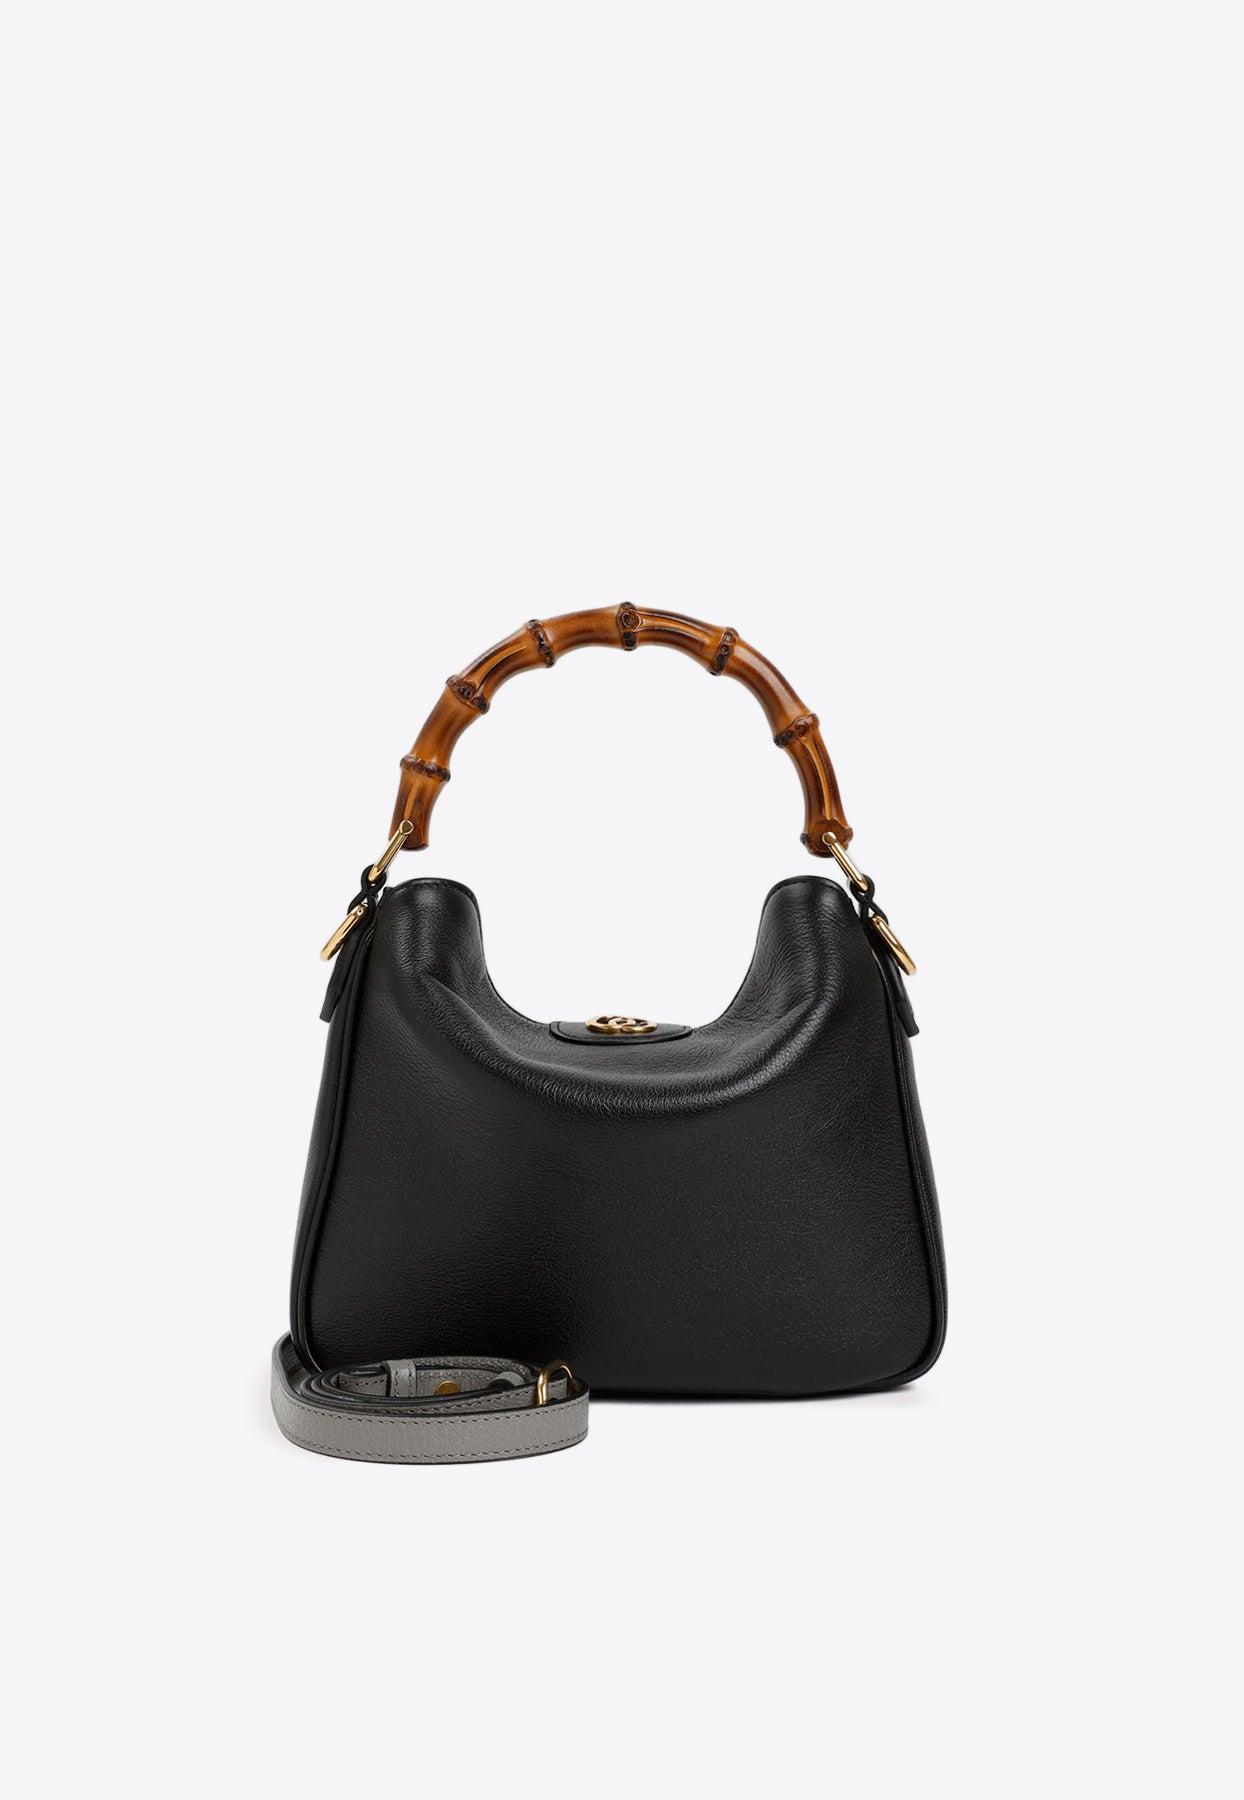 Gucci Diana small shoulder bag in black leather